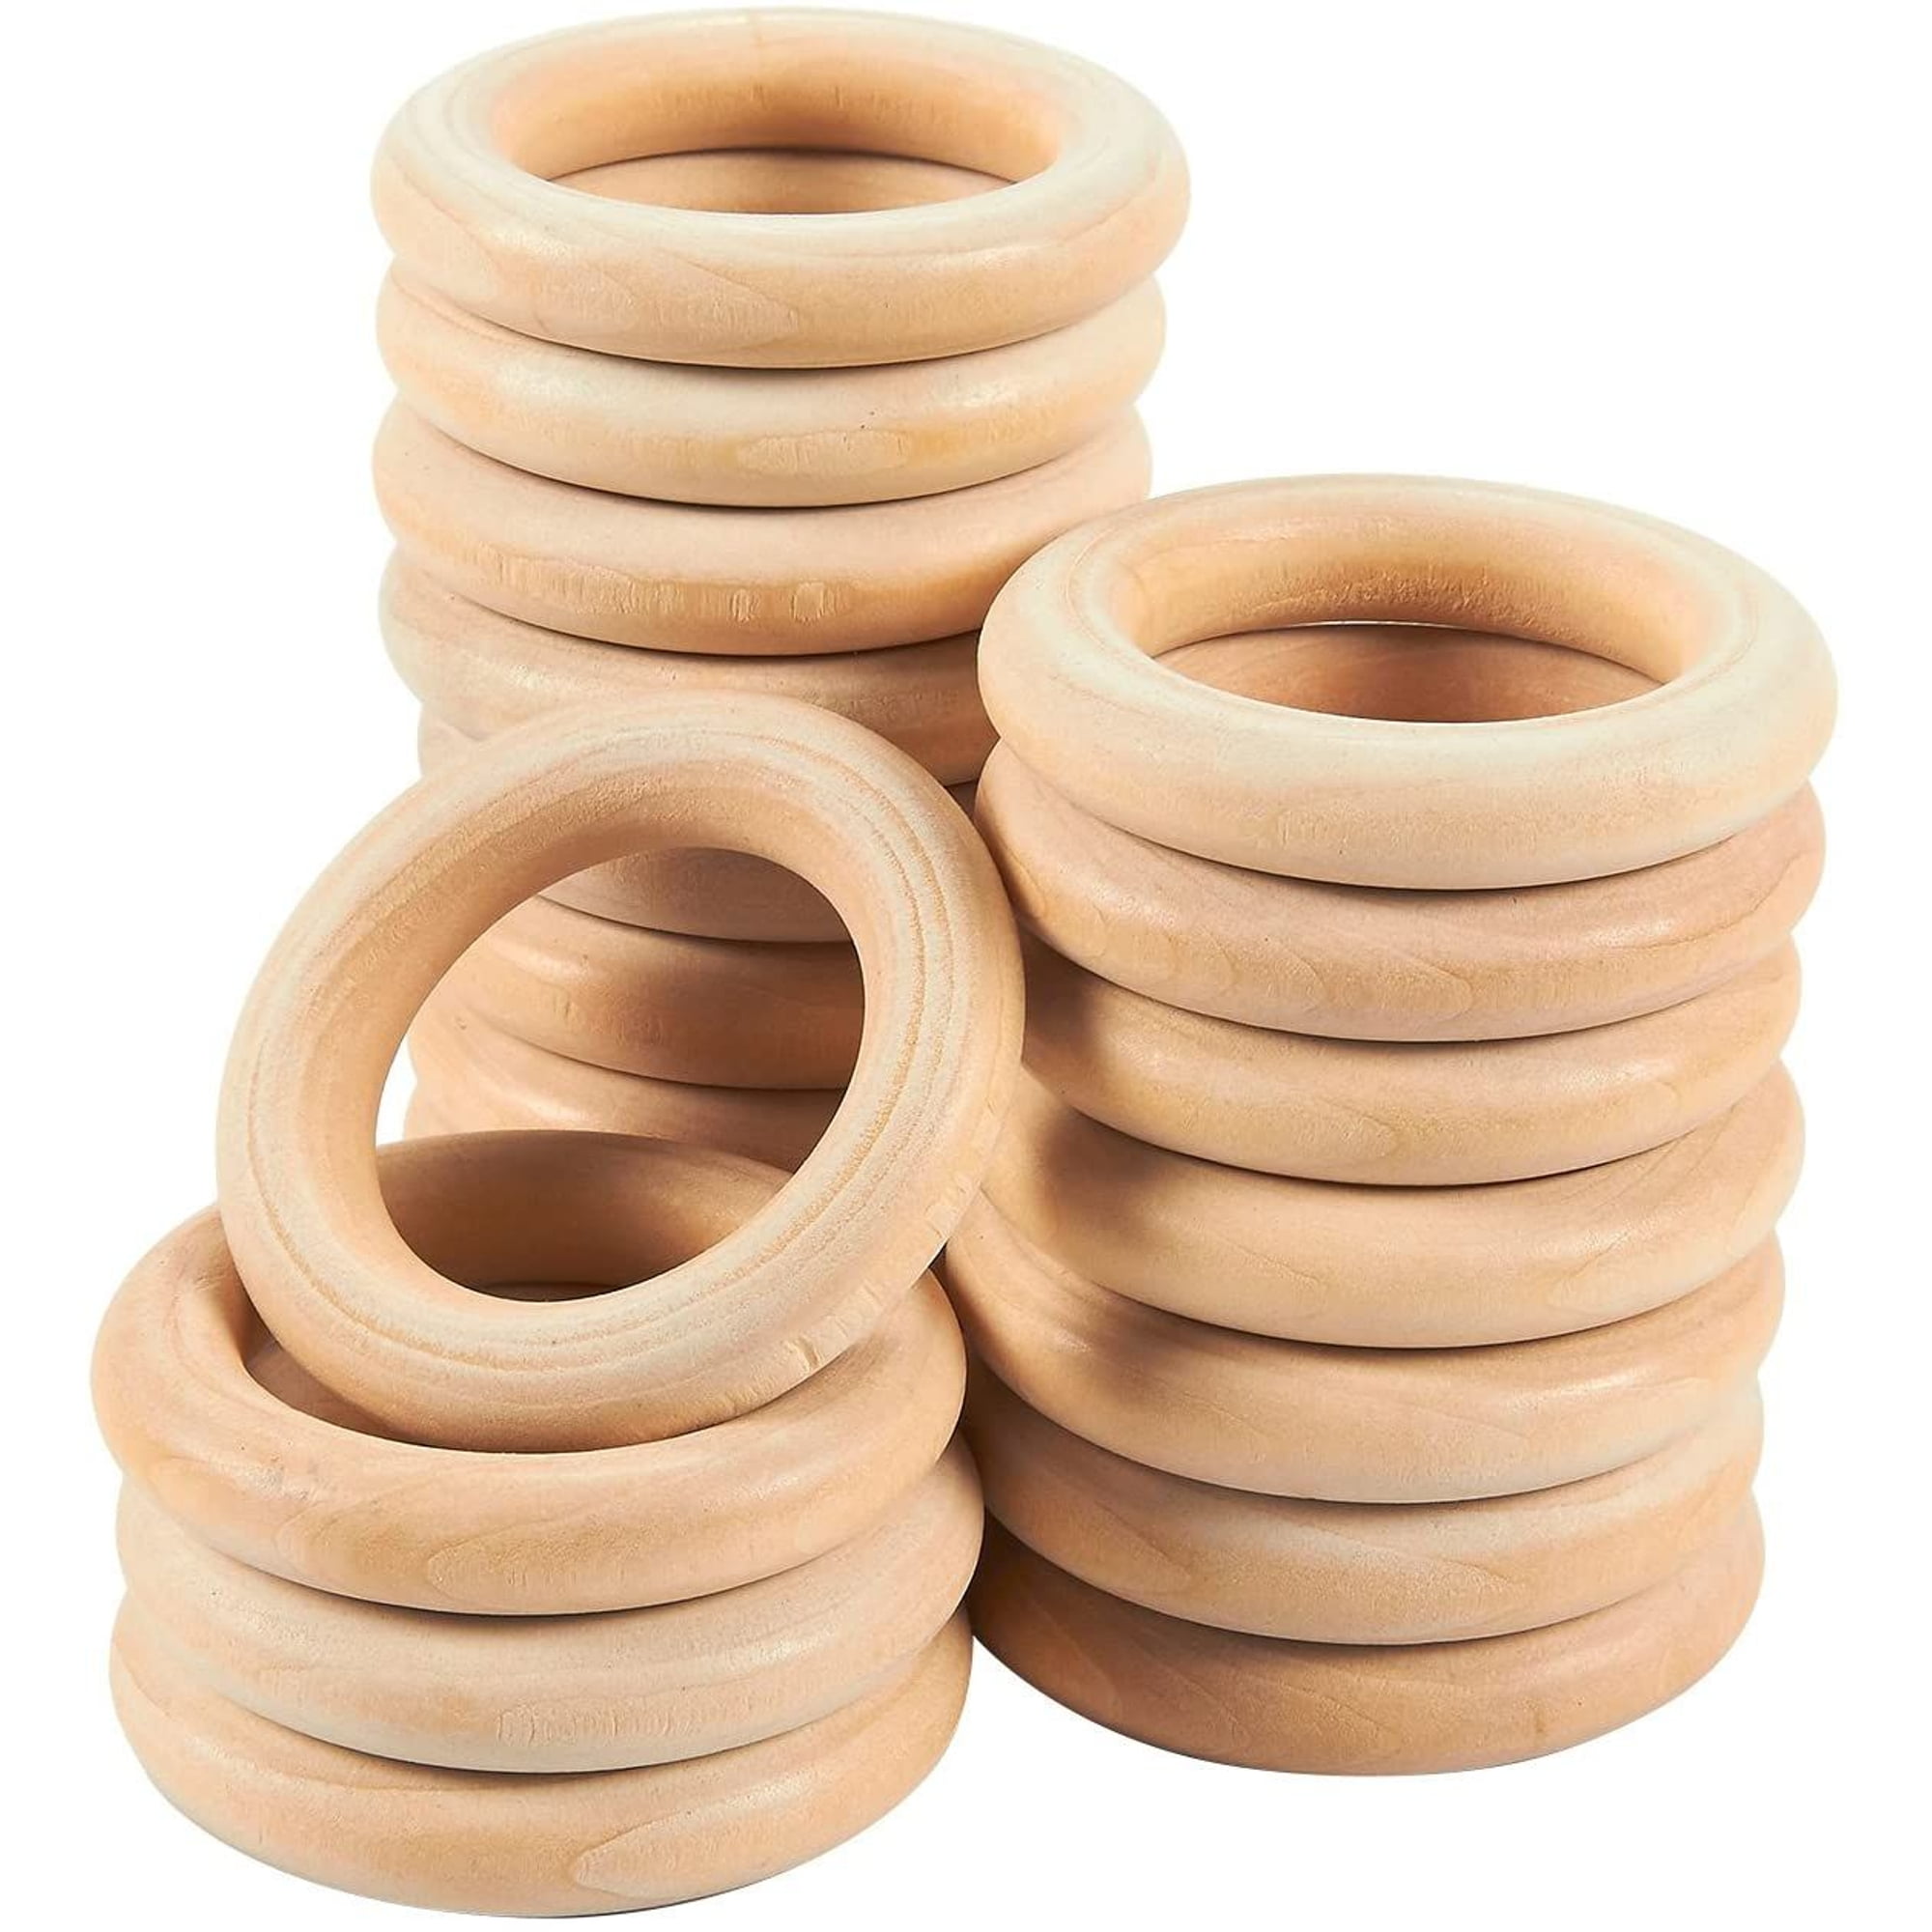 Wooden Rings, 2.7, 10 Pack, Wooden Rings for Crafts, Wood Rings, Macrame  Rings, Wood Rings for Crafts - Mr. Pen Store